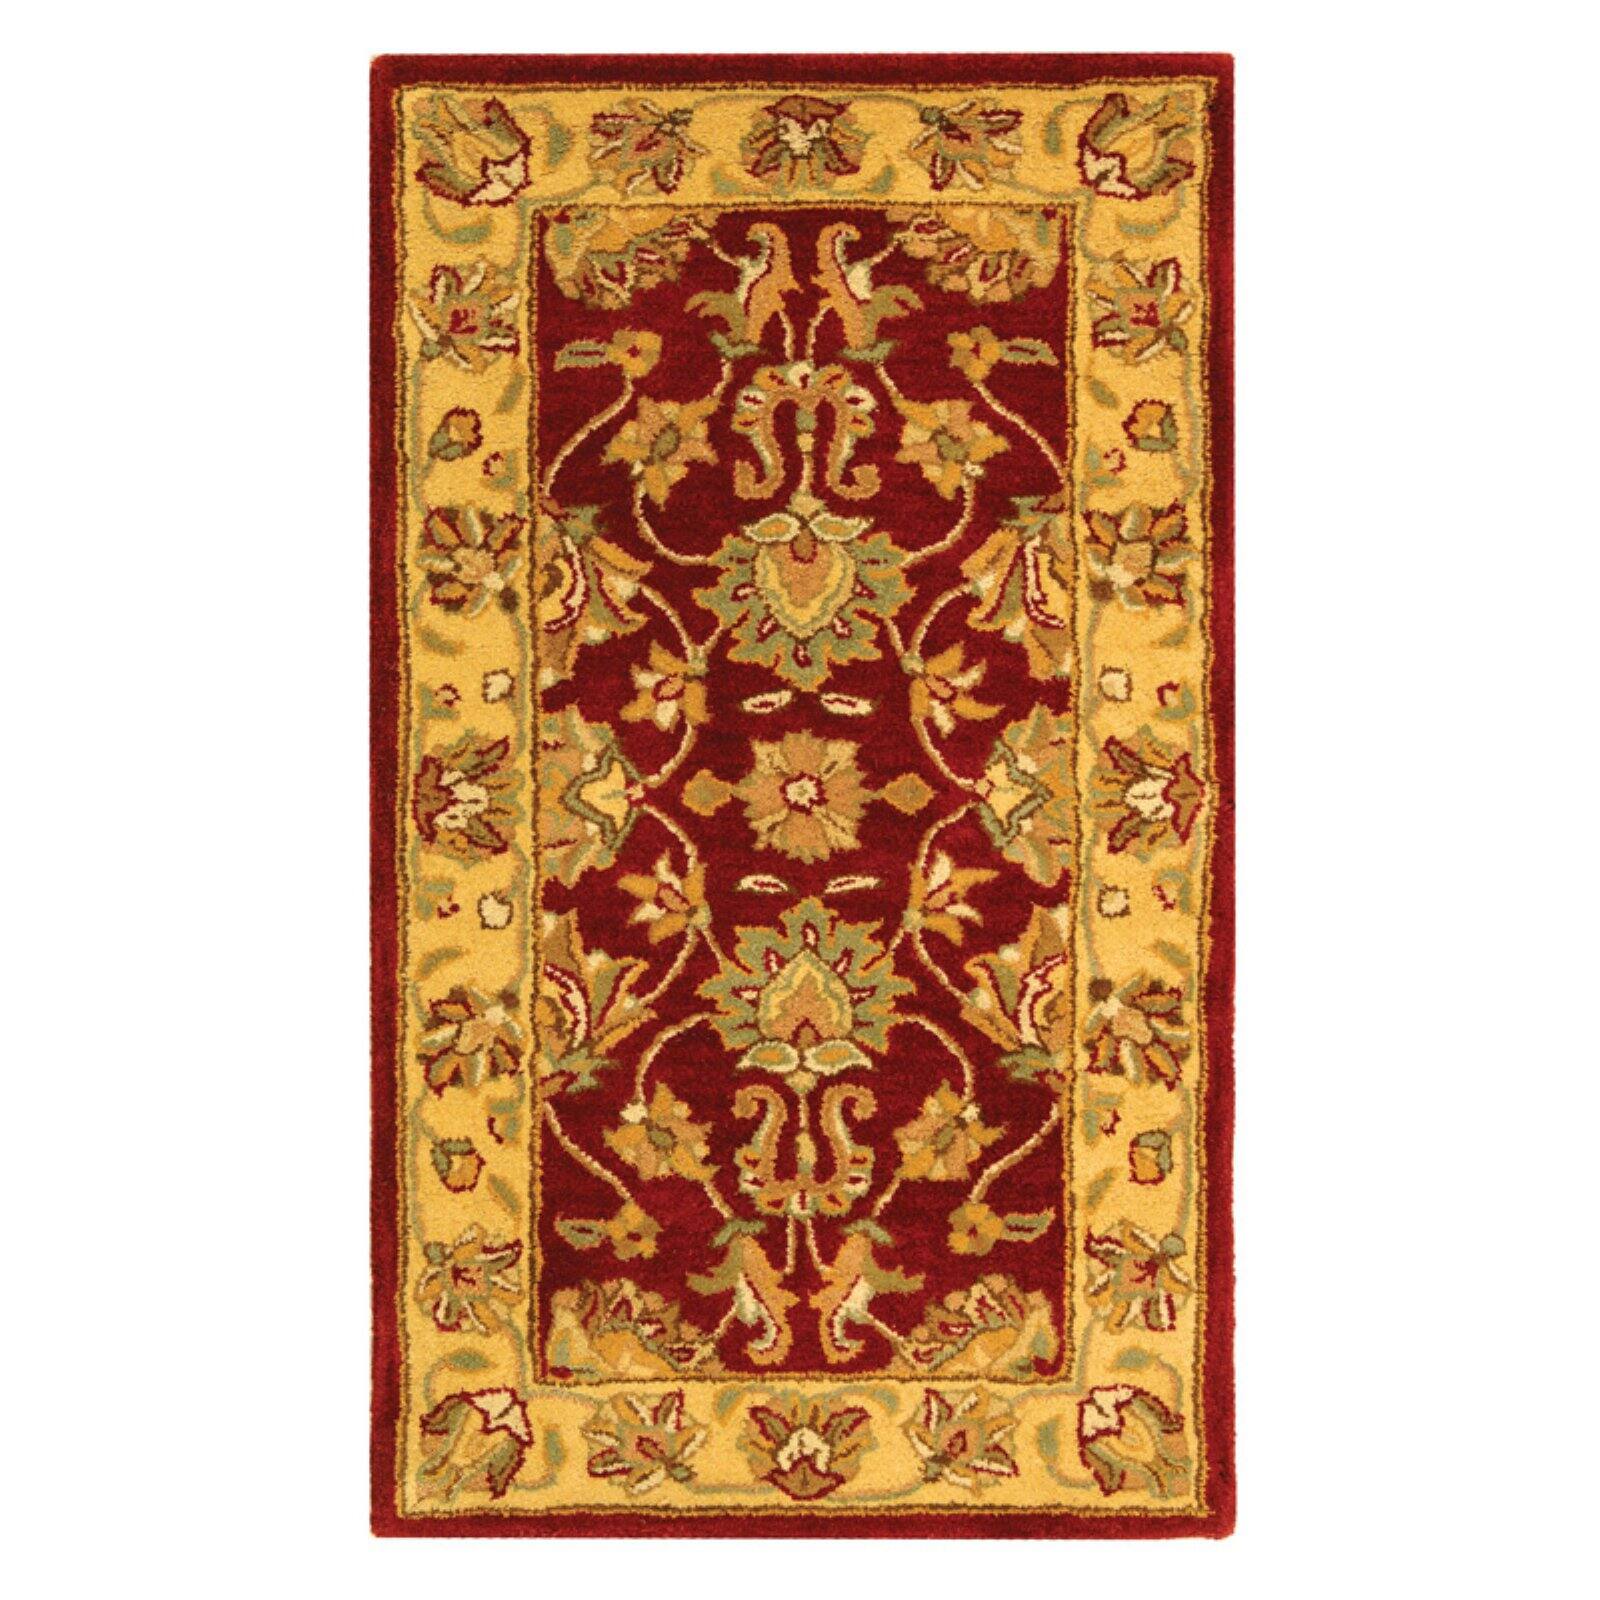 SAFAVIEH Heritage Regis Traditional Wool Area Rug, Red/Gold, 2' x 3' - image 2 of 9